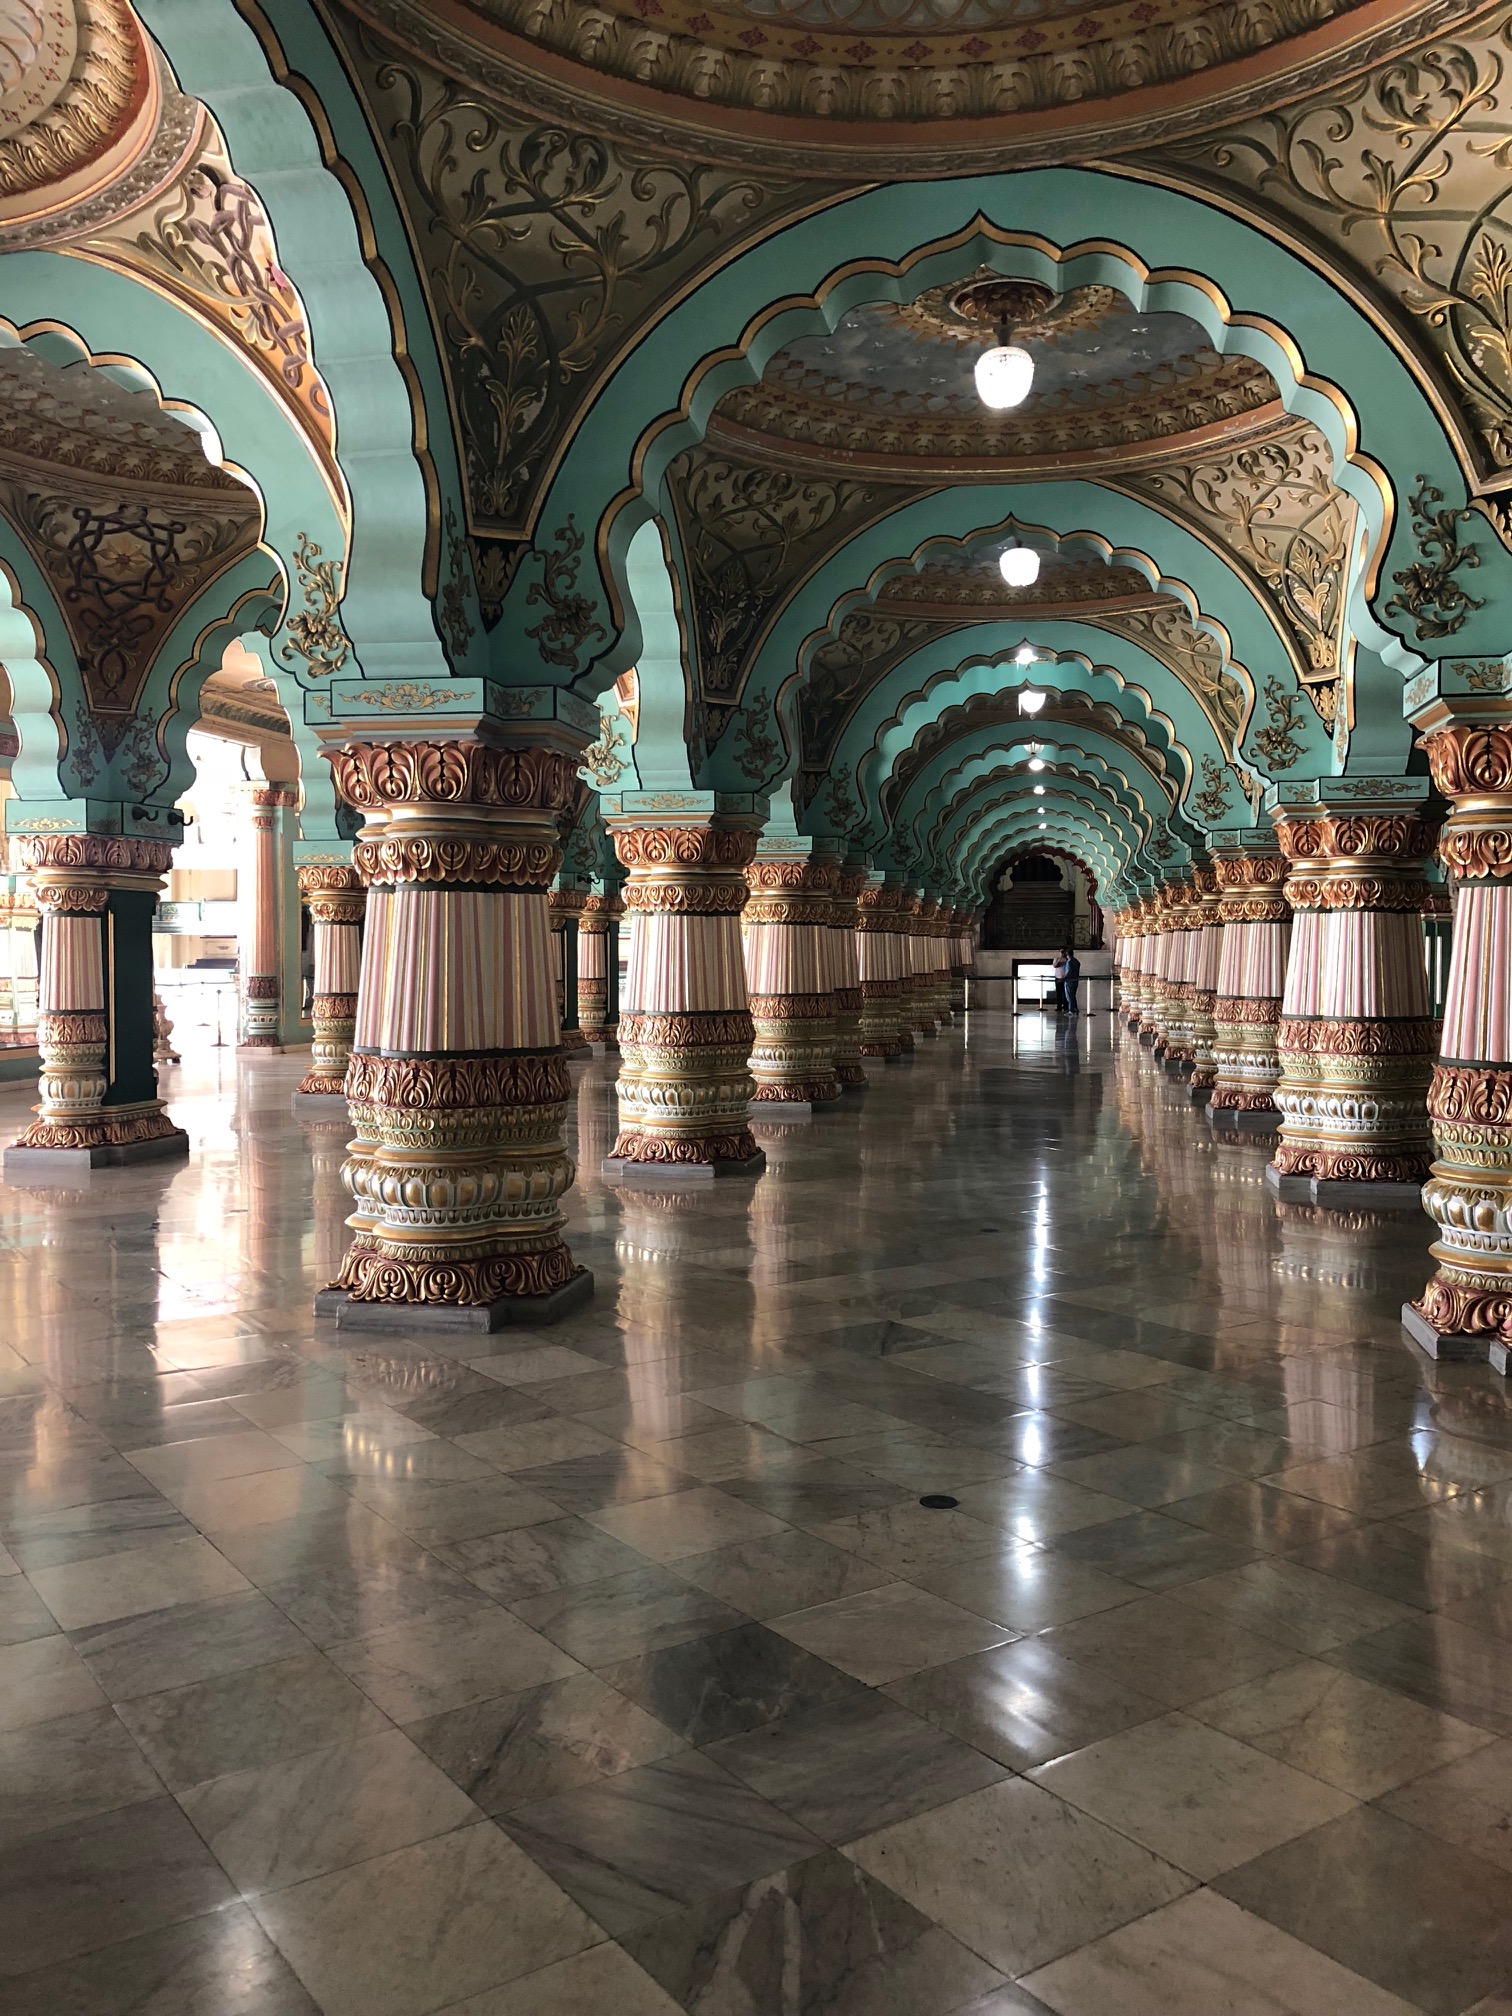 Rows and rows of teal scalloped archways supported by thick ornate columns on a granite floor of large square tiles.